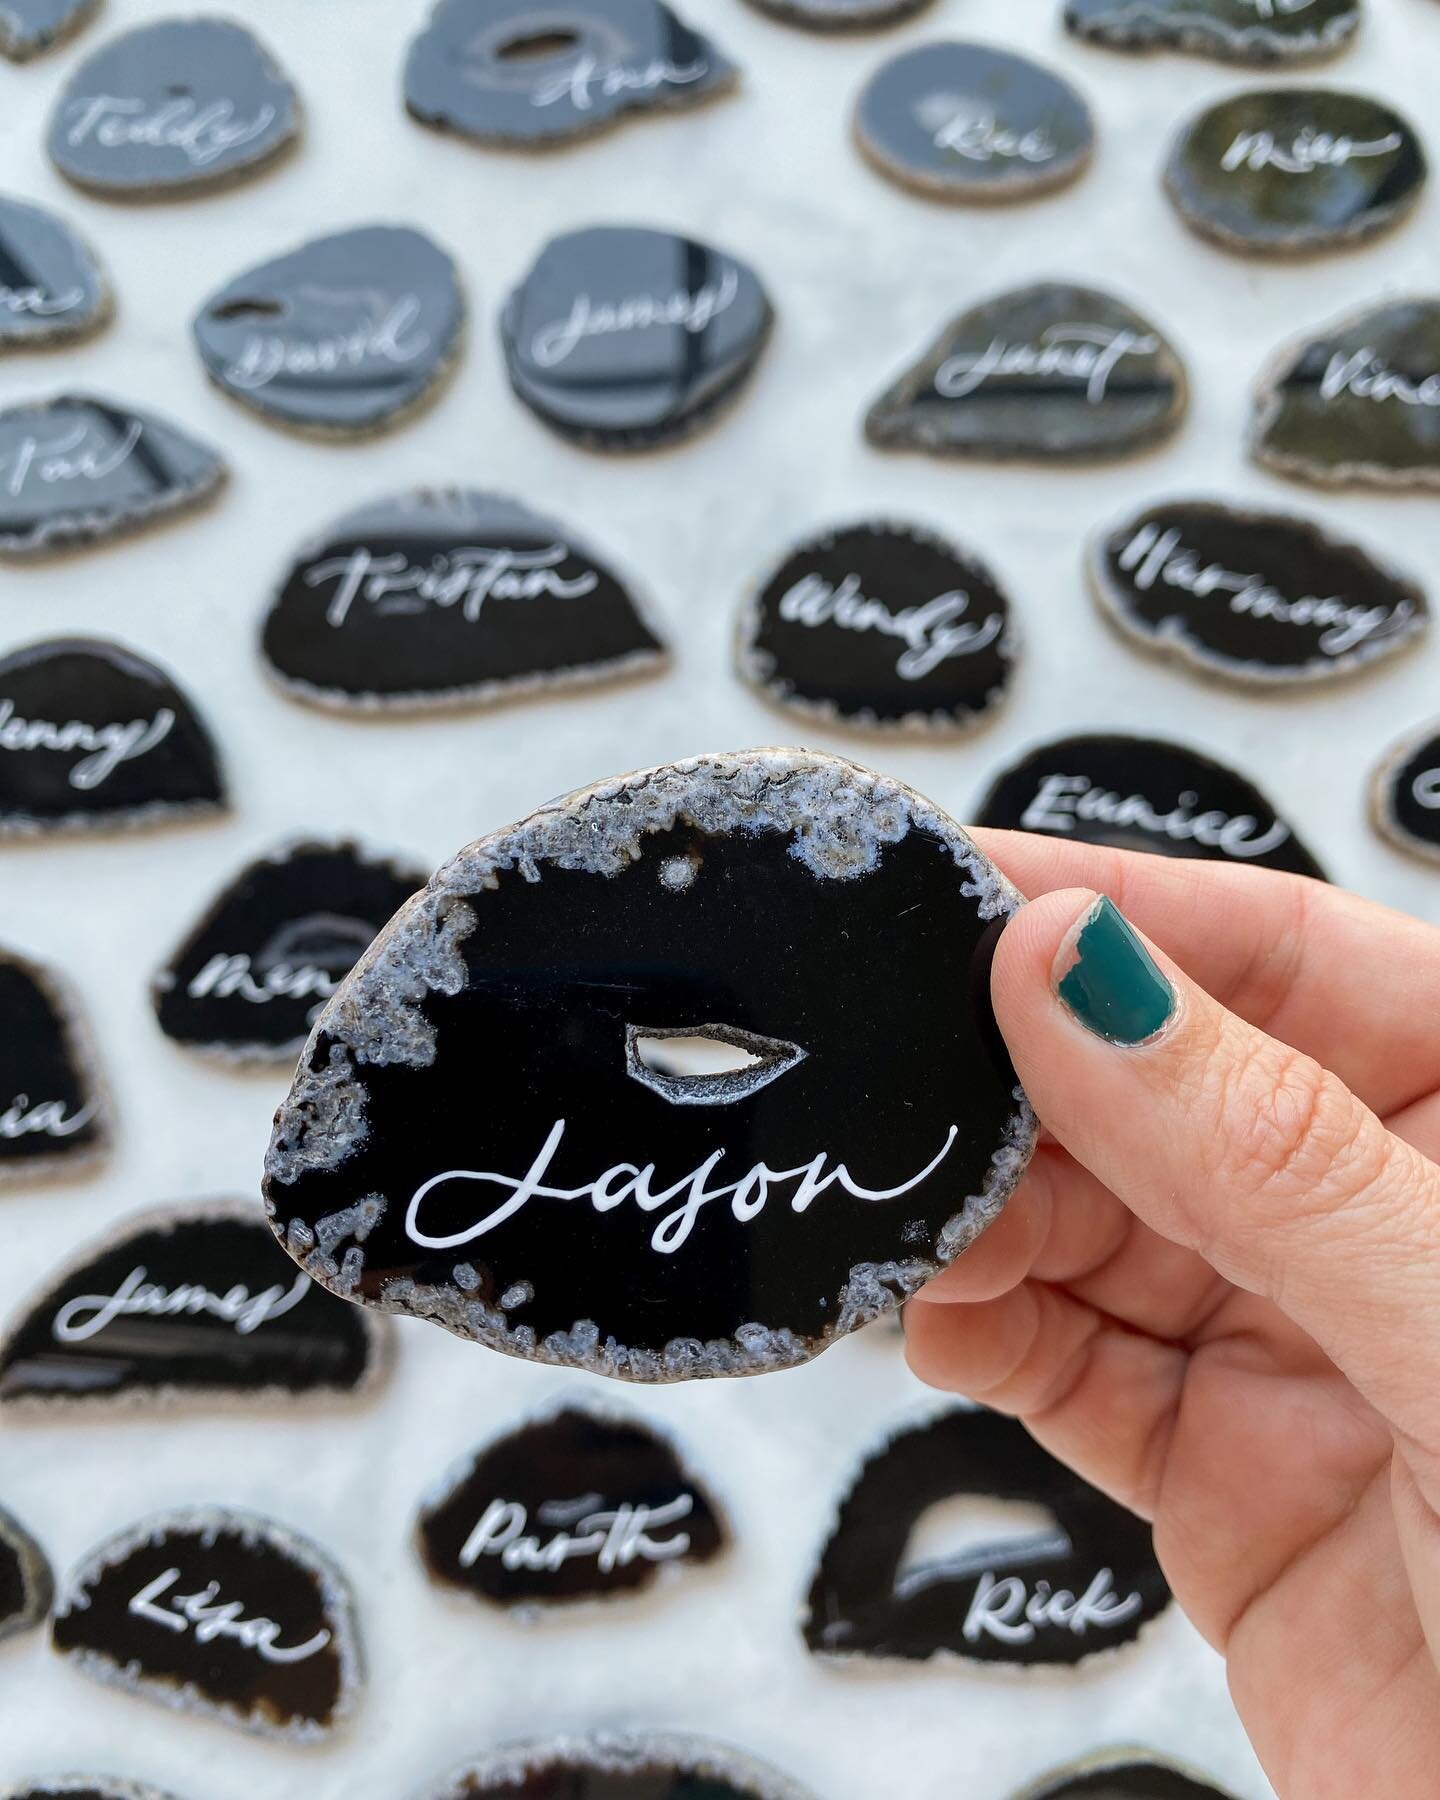 Each Agate slice is different, which makes these place cards so special and beautiful! 
.
#destinationwedding #destinationweddingcostarica #placecards #agateslice #agateslices #blackagate #handwritten #weddinginspo #costaricawedding